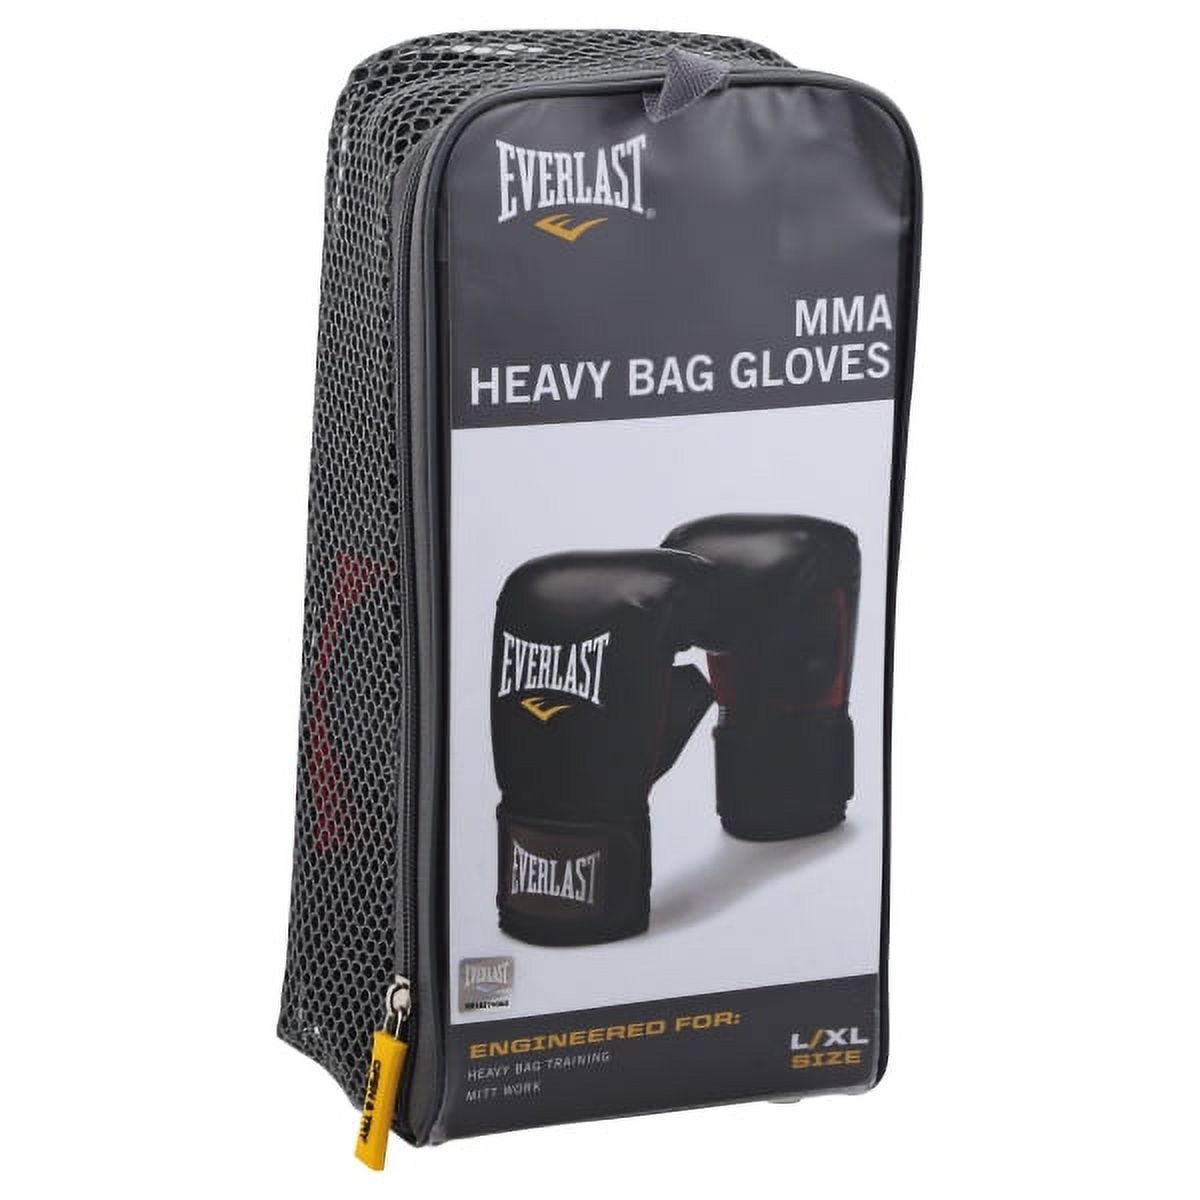 Everlast Mixed Martial Arts Heavy Bag Gloves, Large/XL Black - image 2 of 2